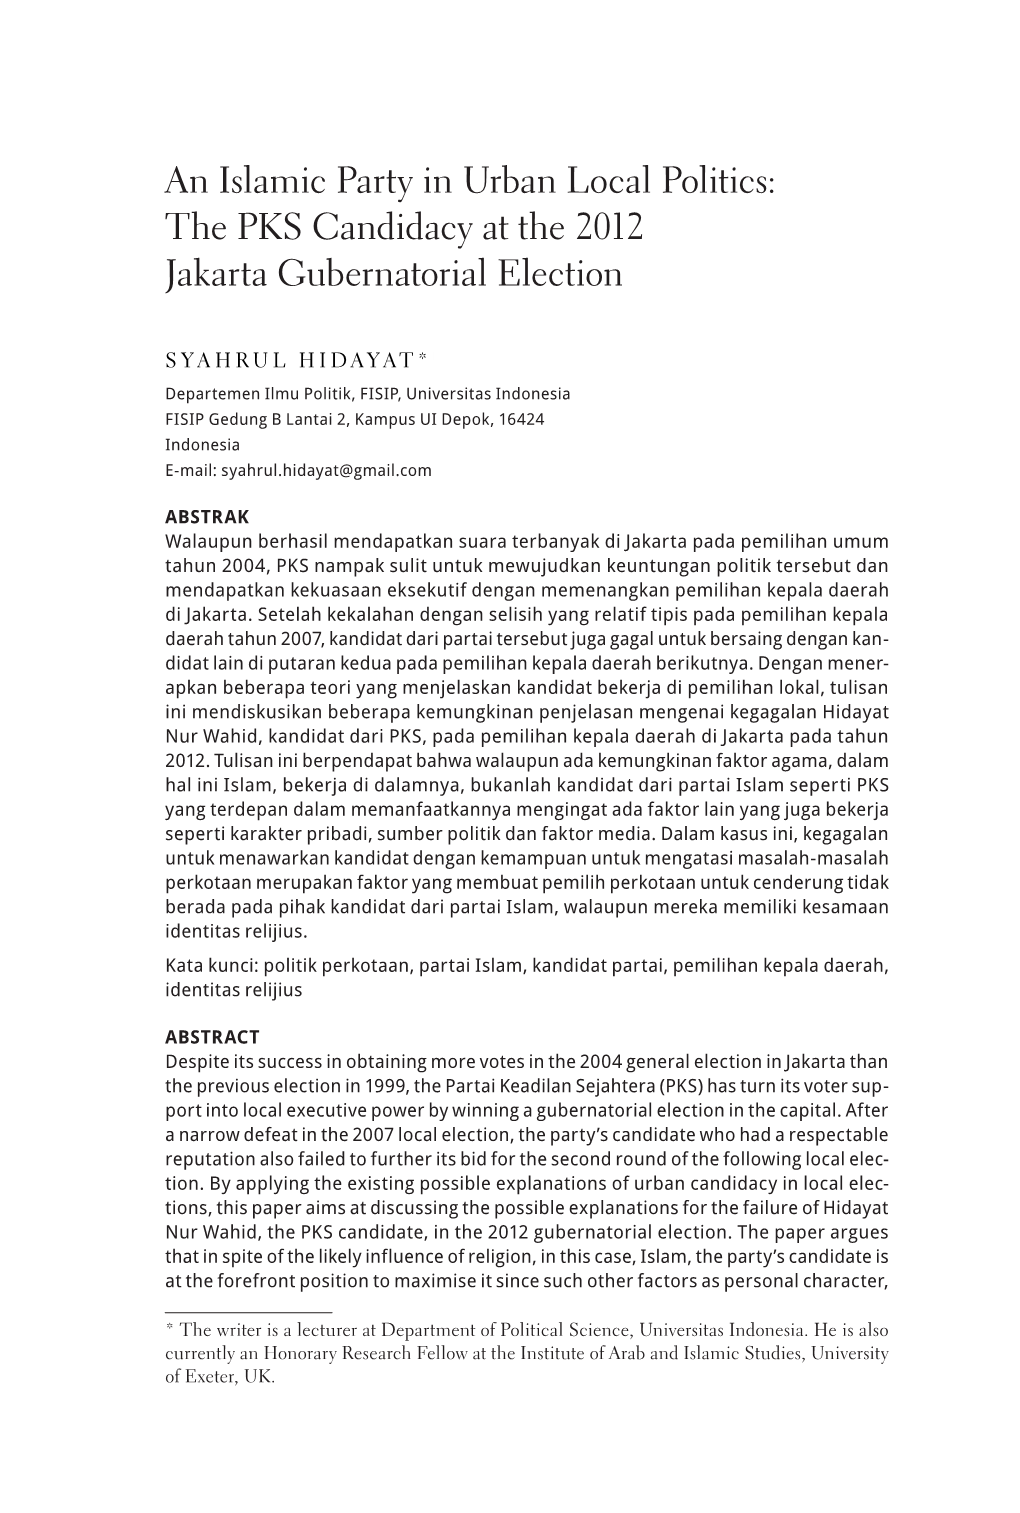 An Islamic Party in Urban Local Politics: the PKS Candidacy at the 2012 Jakarta Gubernatorial Election